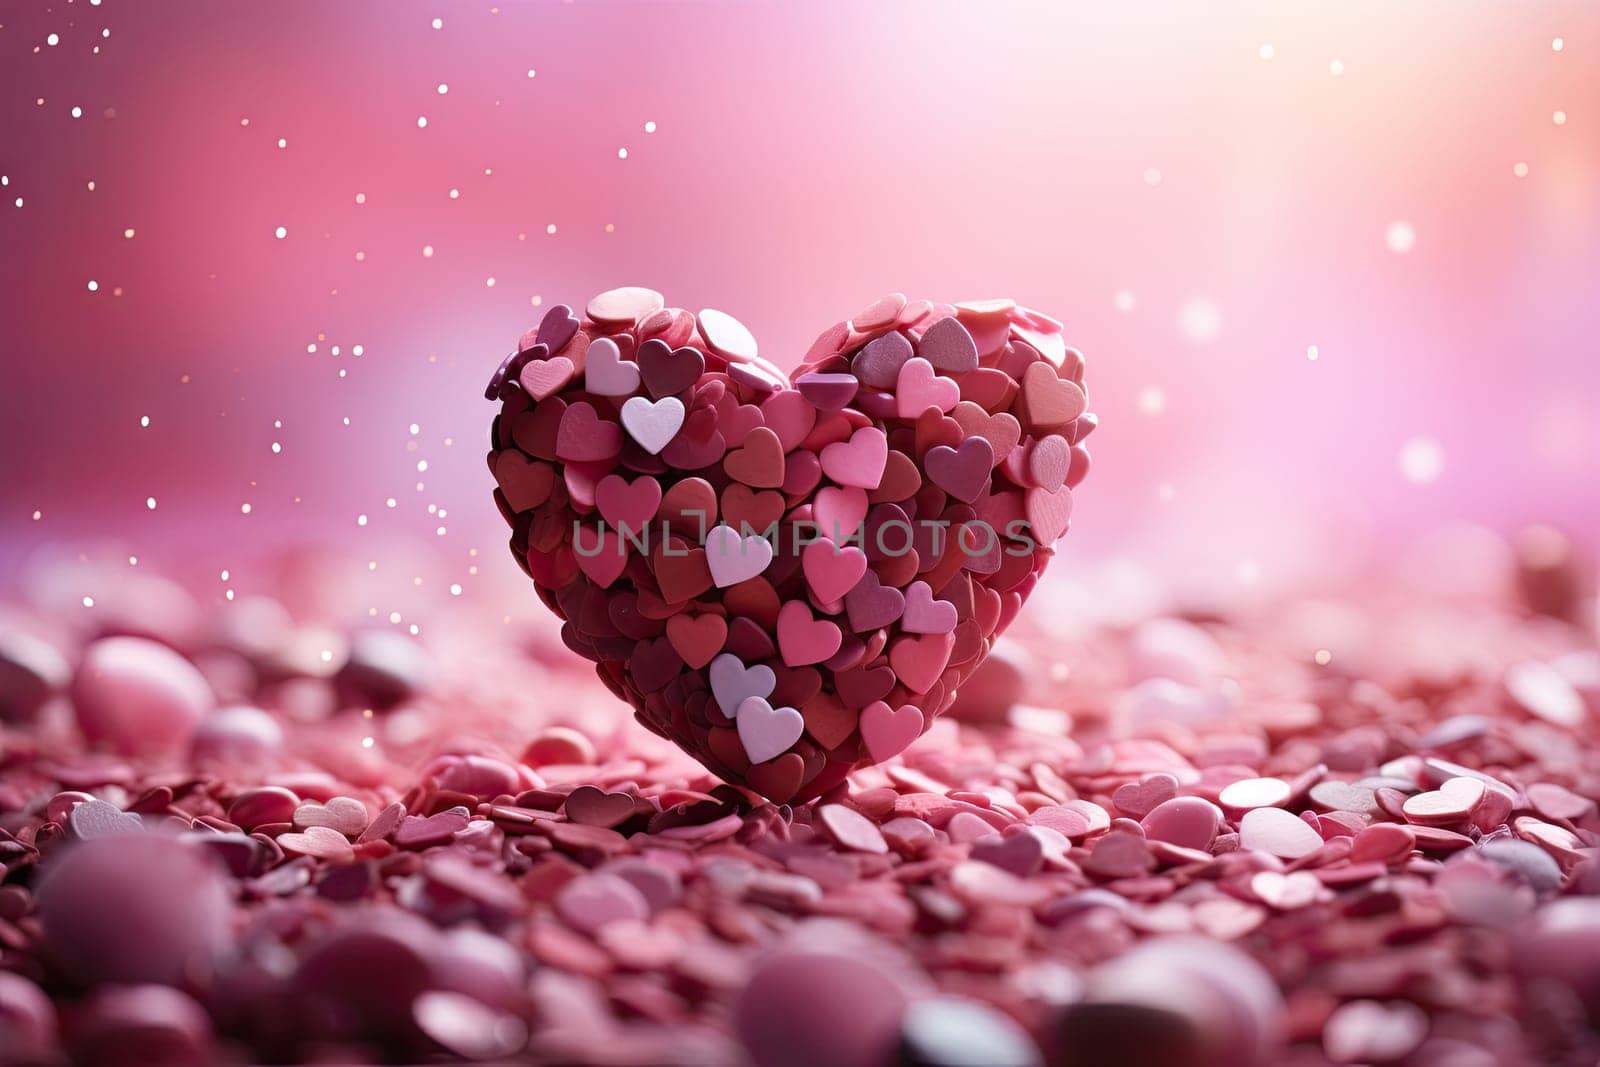 a heart made out of small pink and white hearts on a soft pink background with sparkling stars in the sky